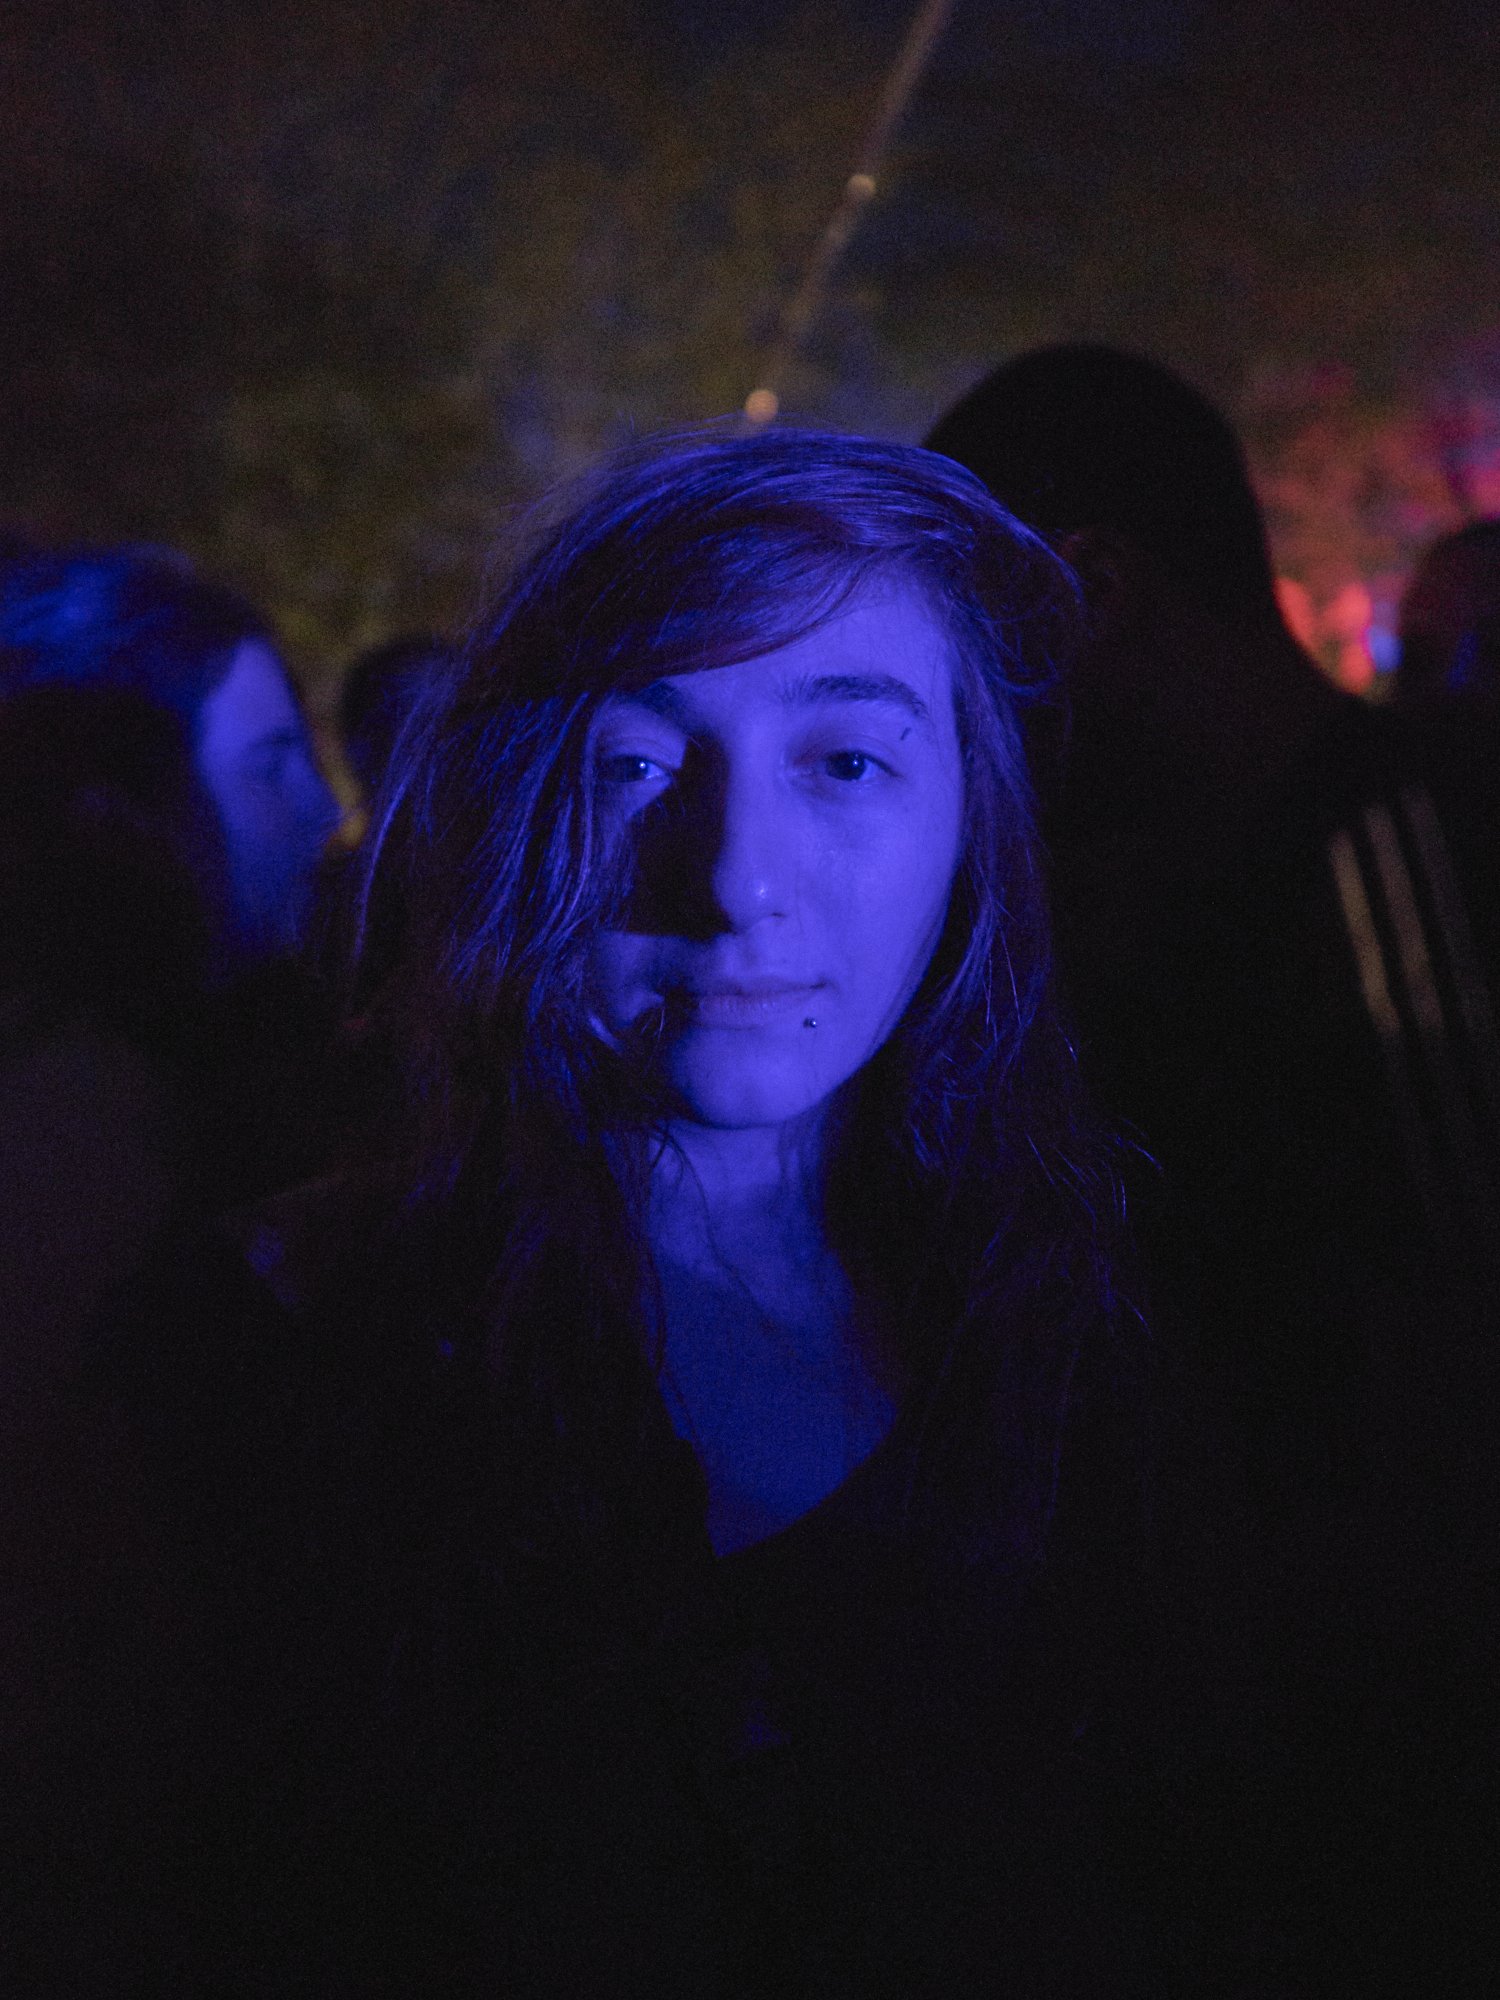  Mariam poses for a portrait during the open air gig of Kollektiv Turmstraße at the Ciscari site. 